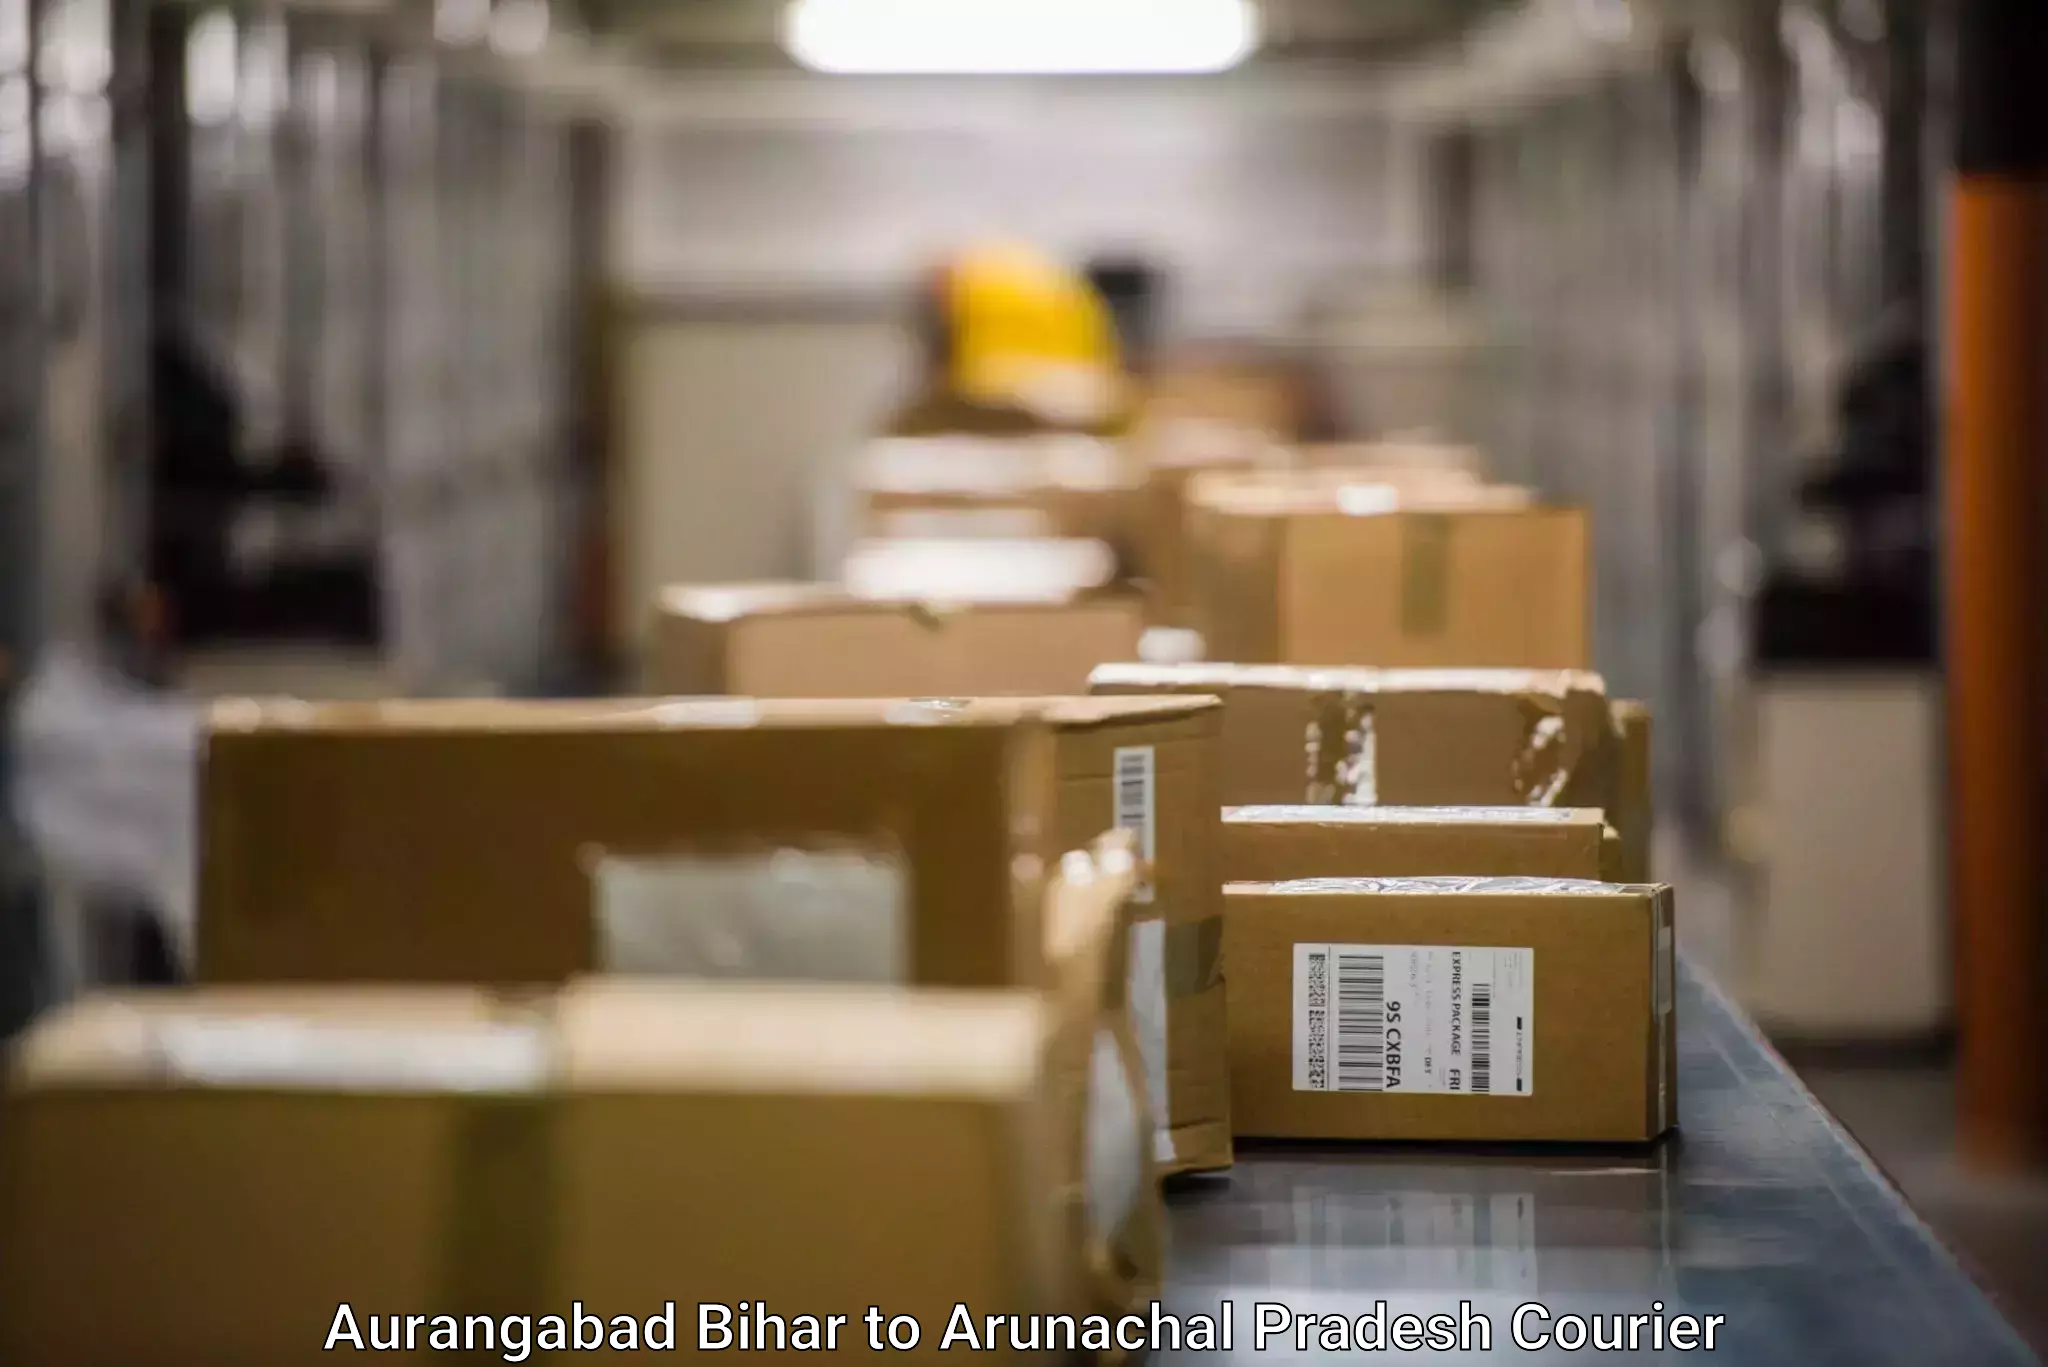 Dynamic courier operations Aurangabad Bihar to Lower Dibang Valley